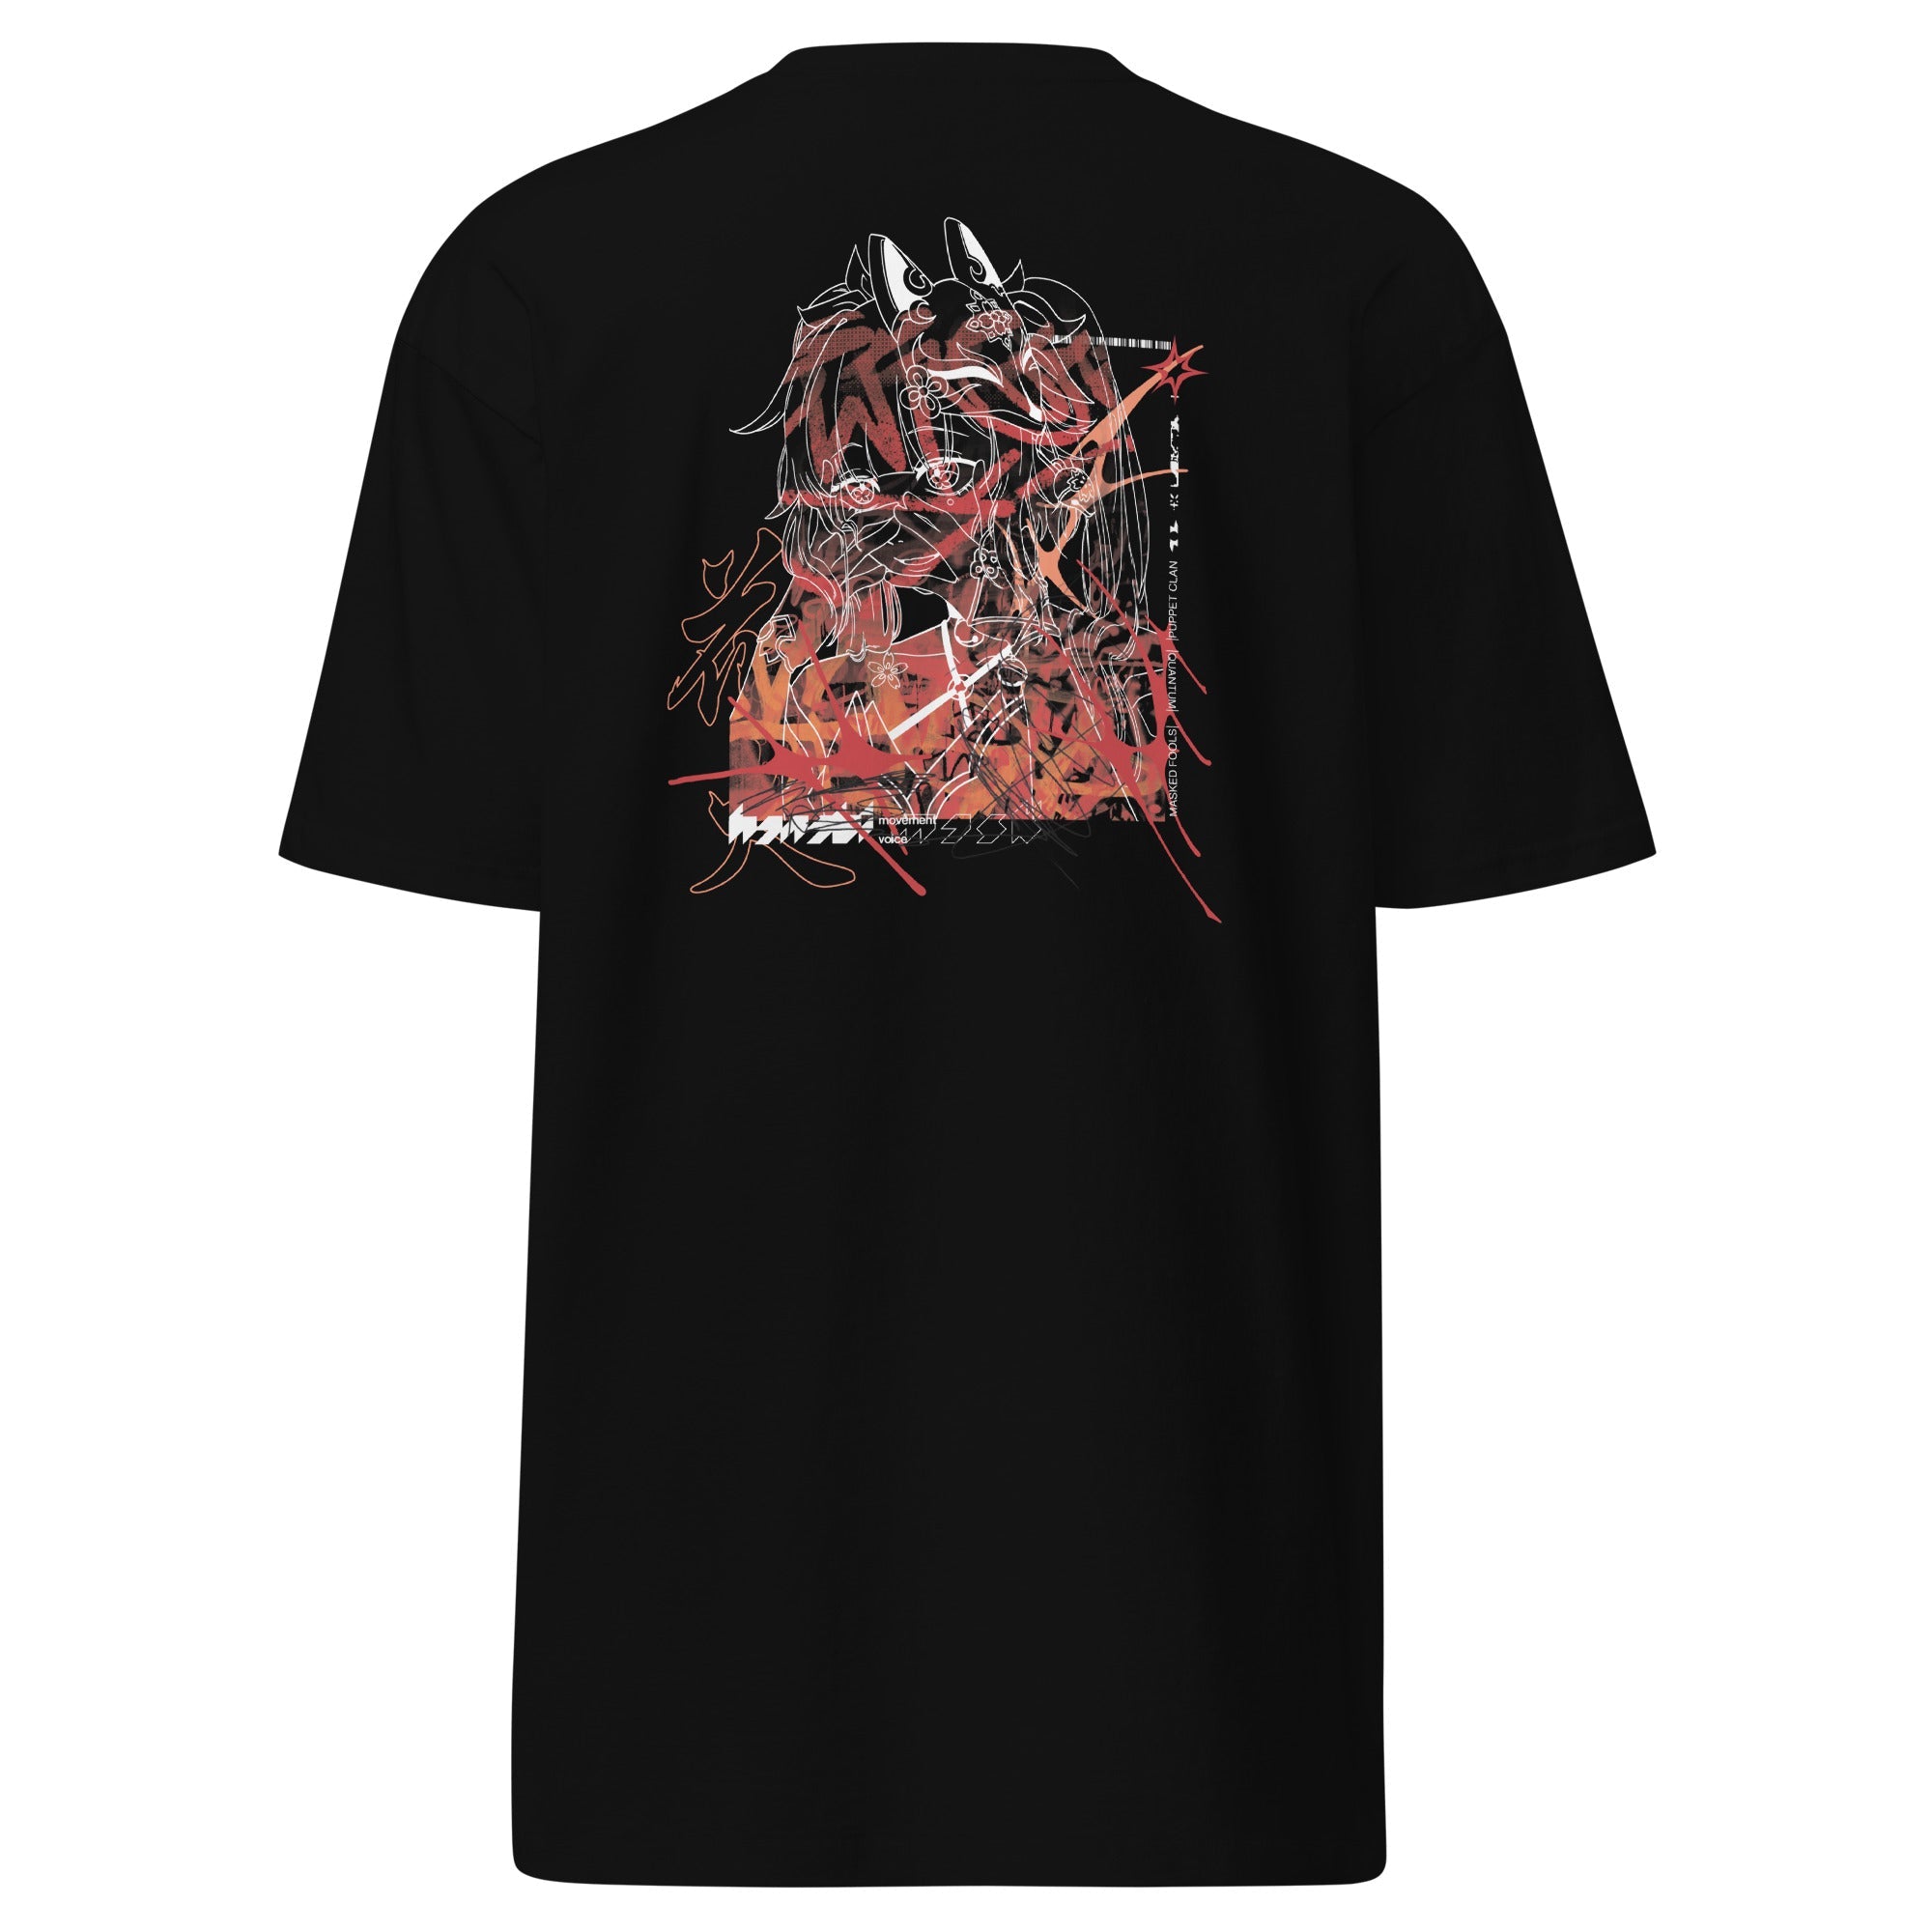 SHOWTIME • t-shirt - Jackler - anime-inspired streetwear - anime clothing